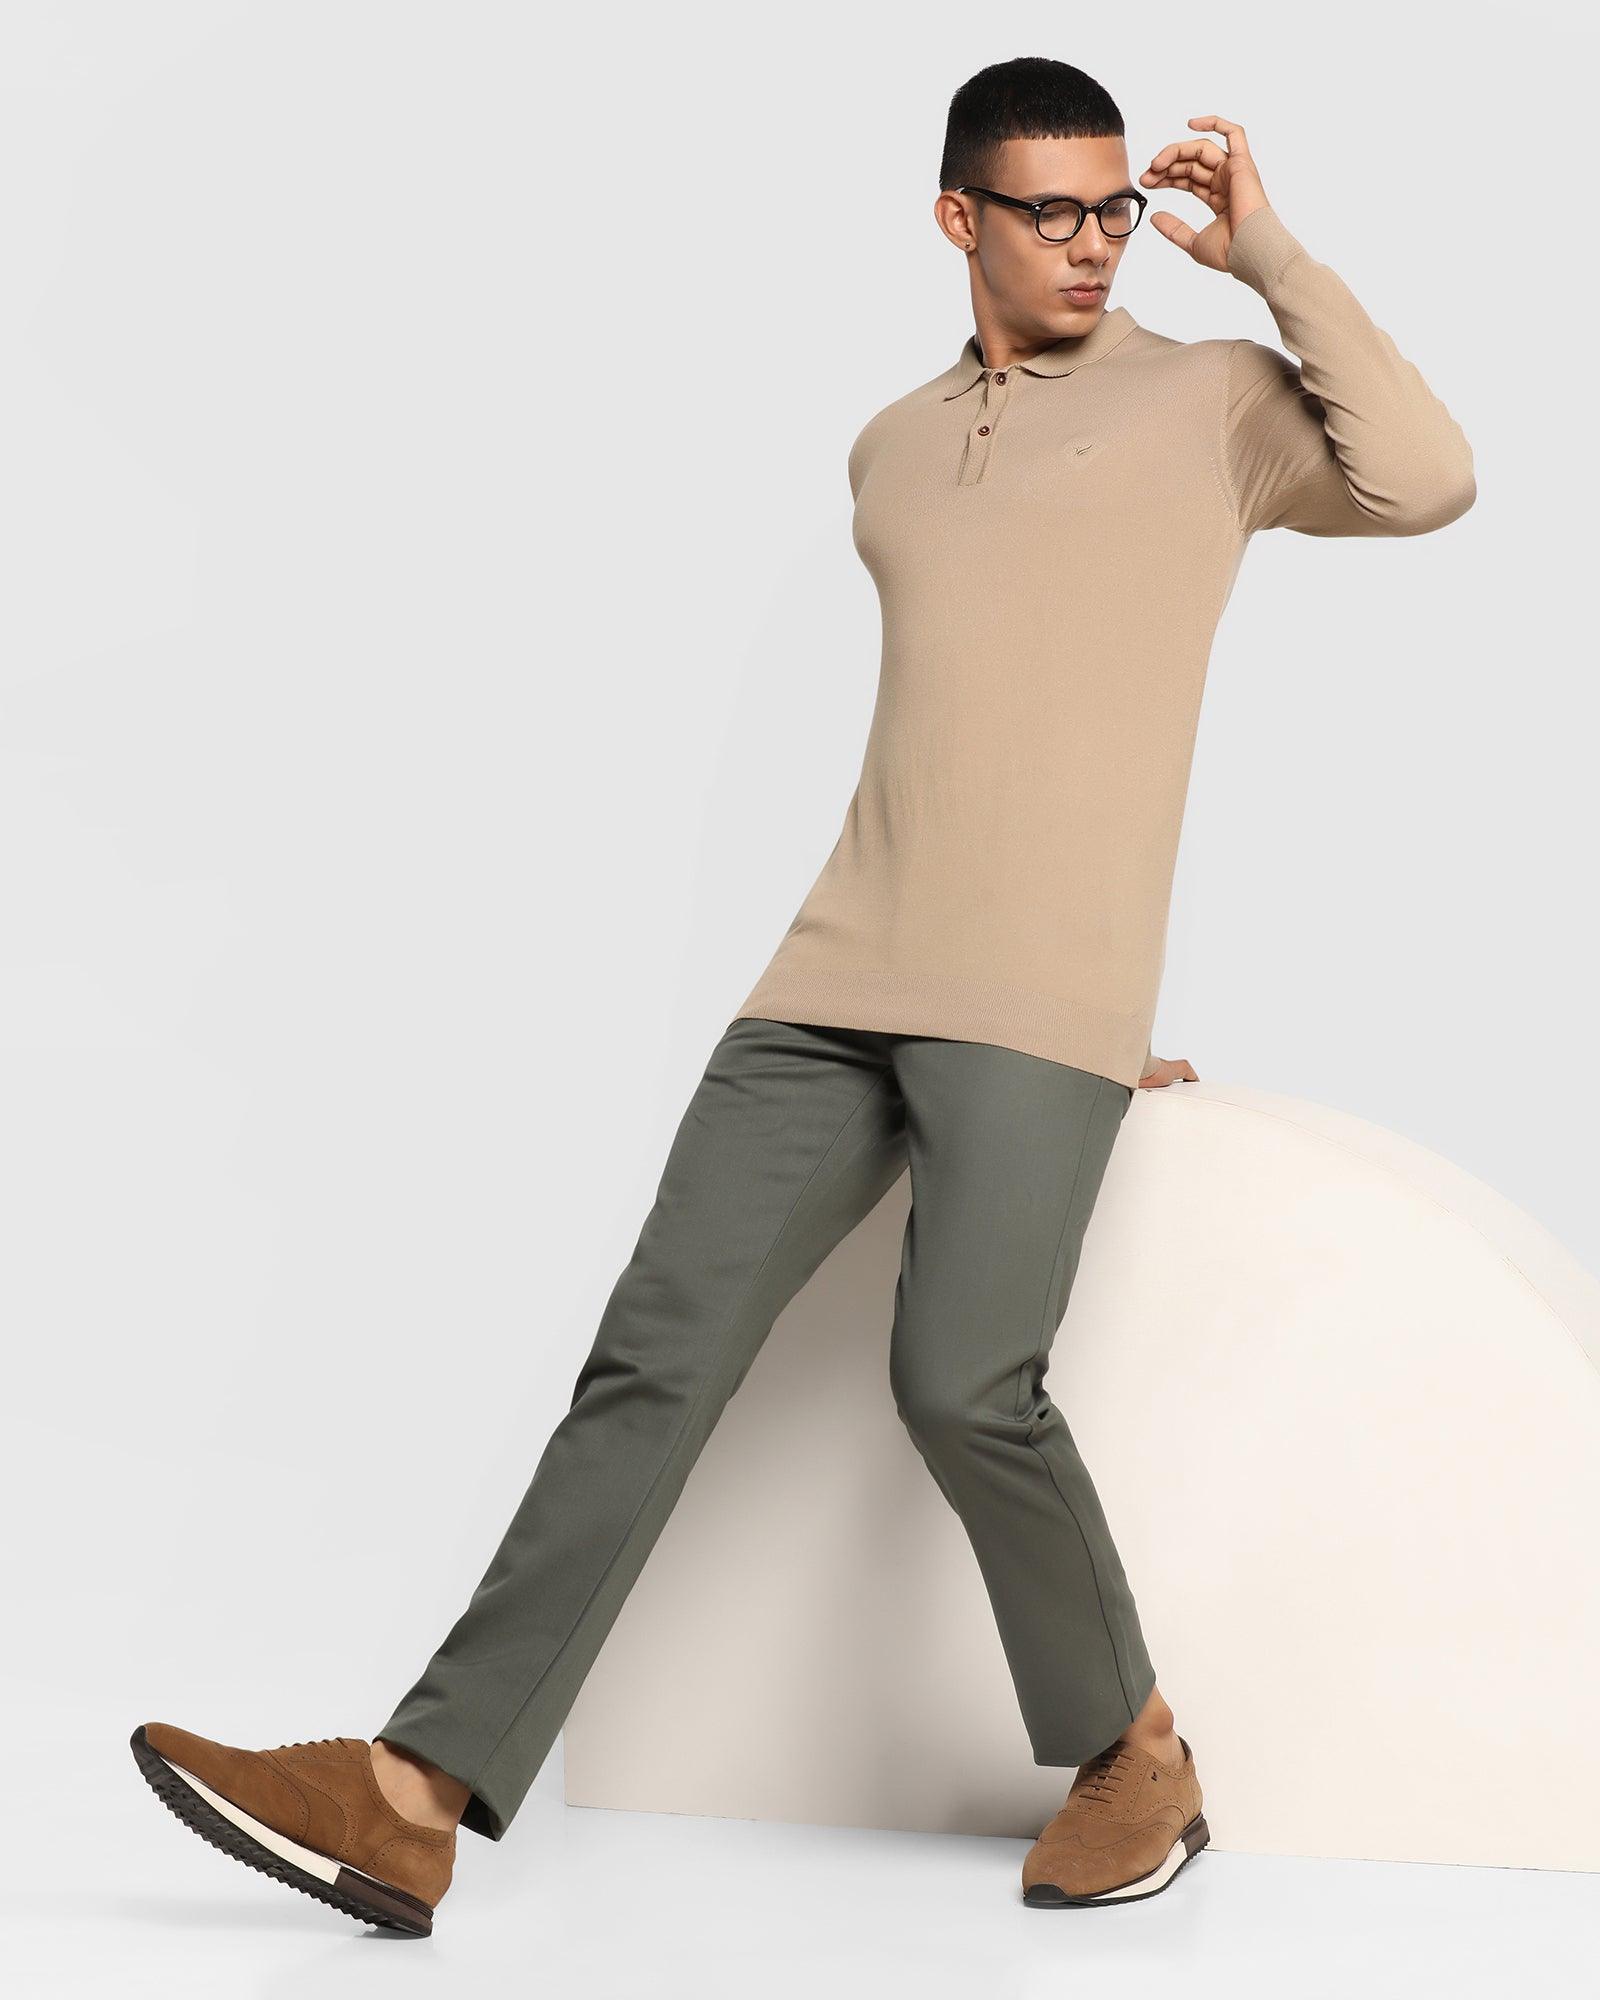 Slim Comfort B-95 Casual Olive Solid Khakis - Clate